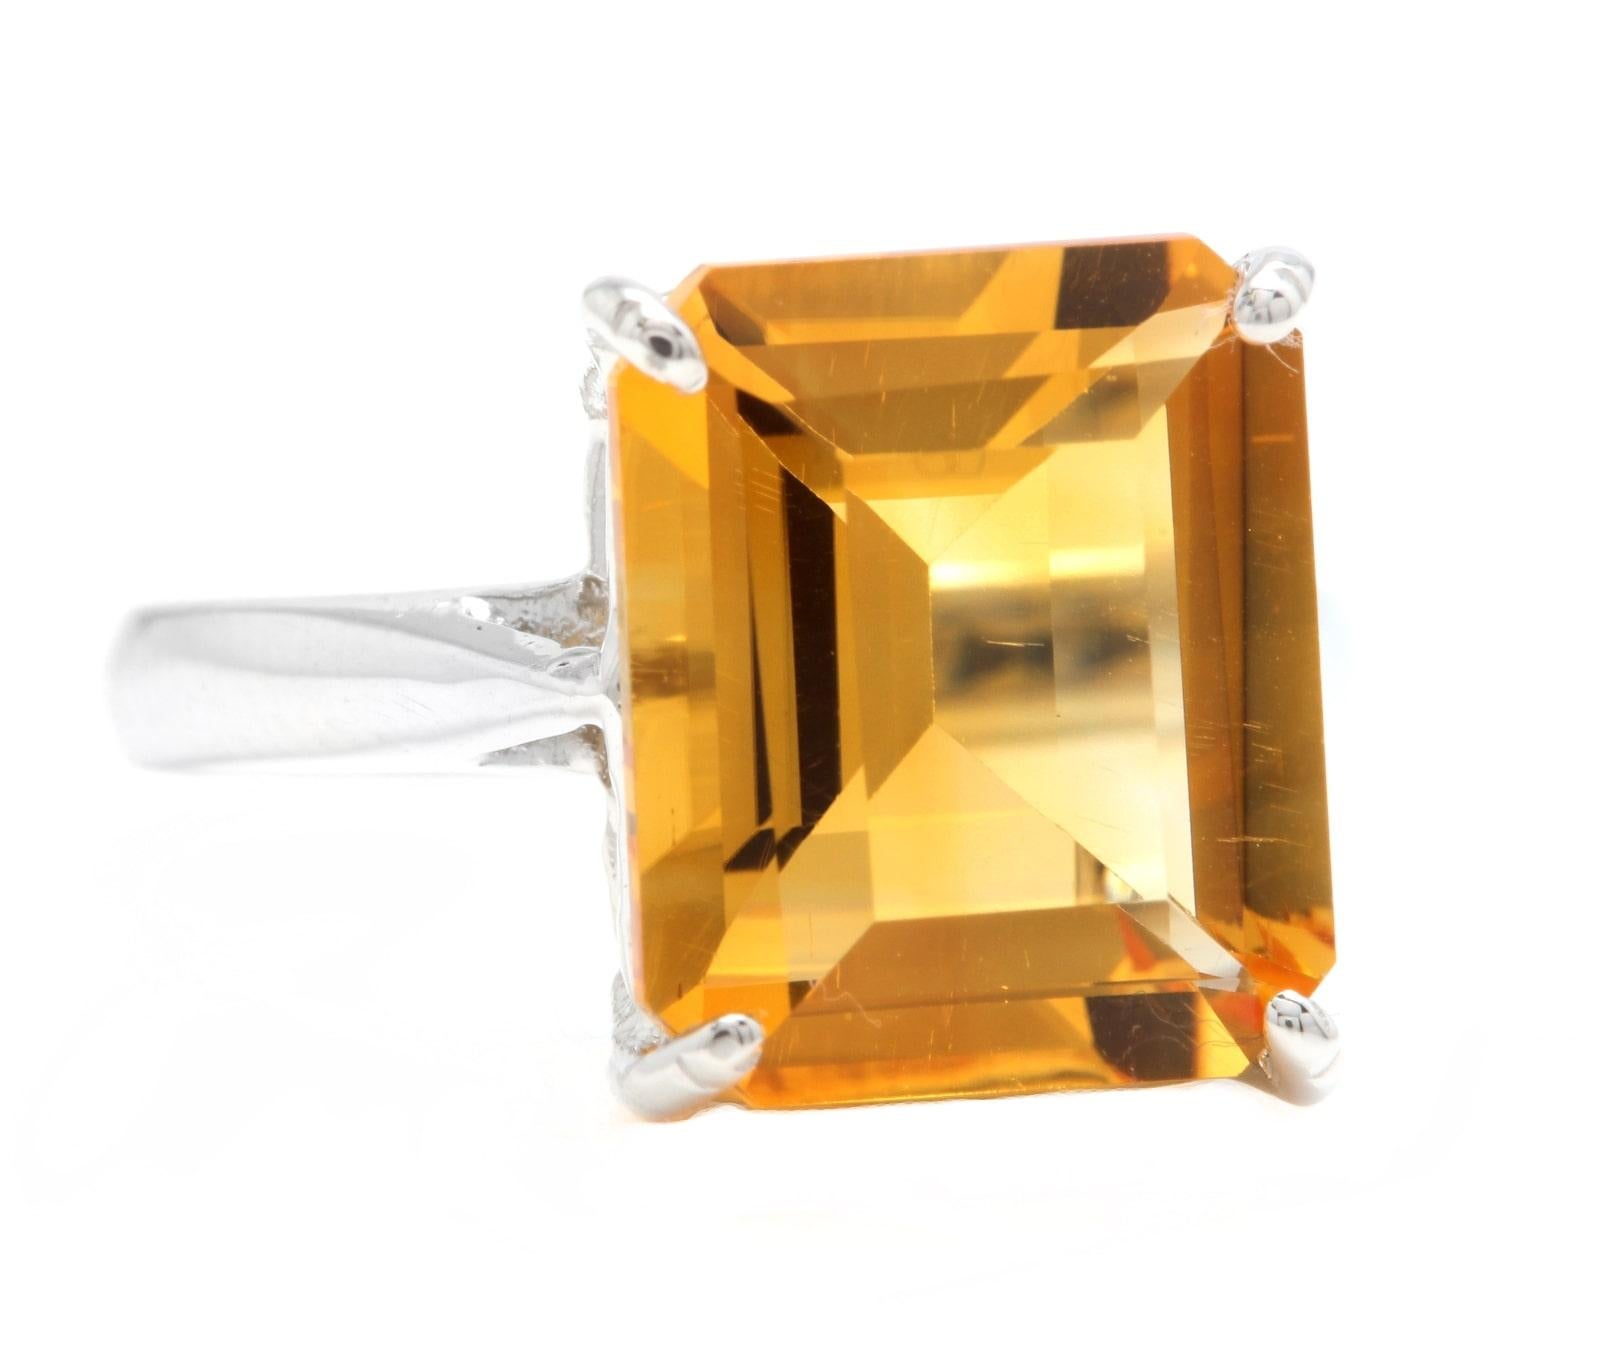 6.00 Carats Exquisite Natural Citrine 14K Solid White Gold Ring

Total Natural Citrine Weight is: Approx. 6.00 Carats 

Citrine Measures: Approx. 12.00 x 10.00mm

Citrine Treatment: Heat

Ring size: 5.5 ( Free Sizing available)

Ring total weight: